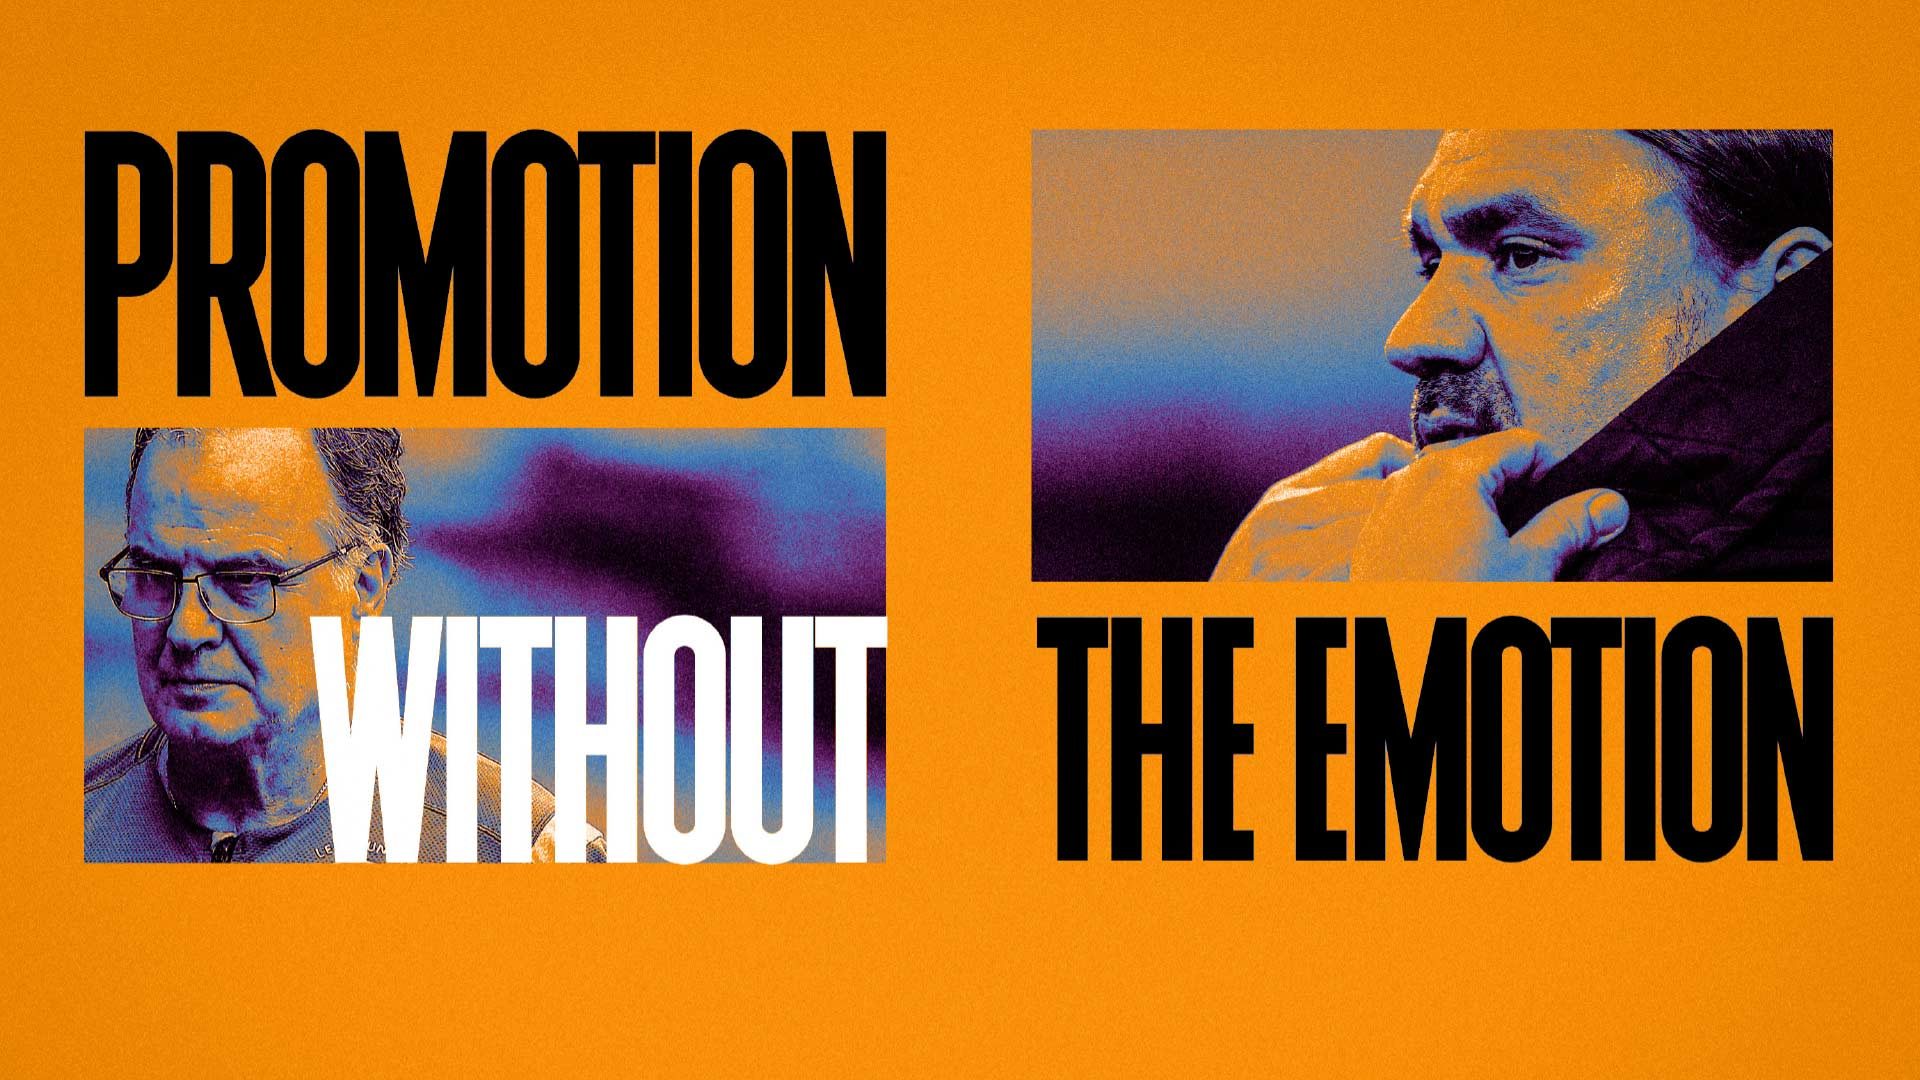 Images of Marcelo Bielsa and Daniel Farke side by side with the words 'Promotion without the emotion'